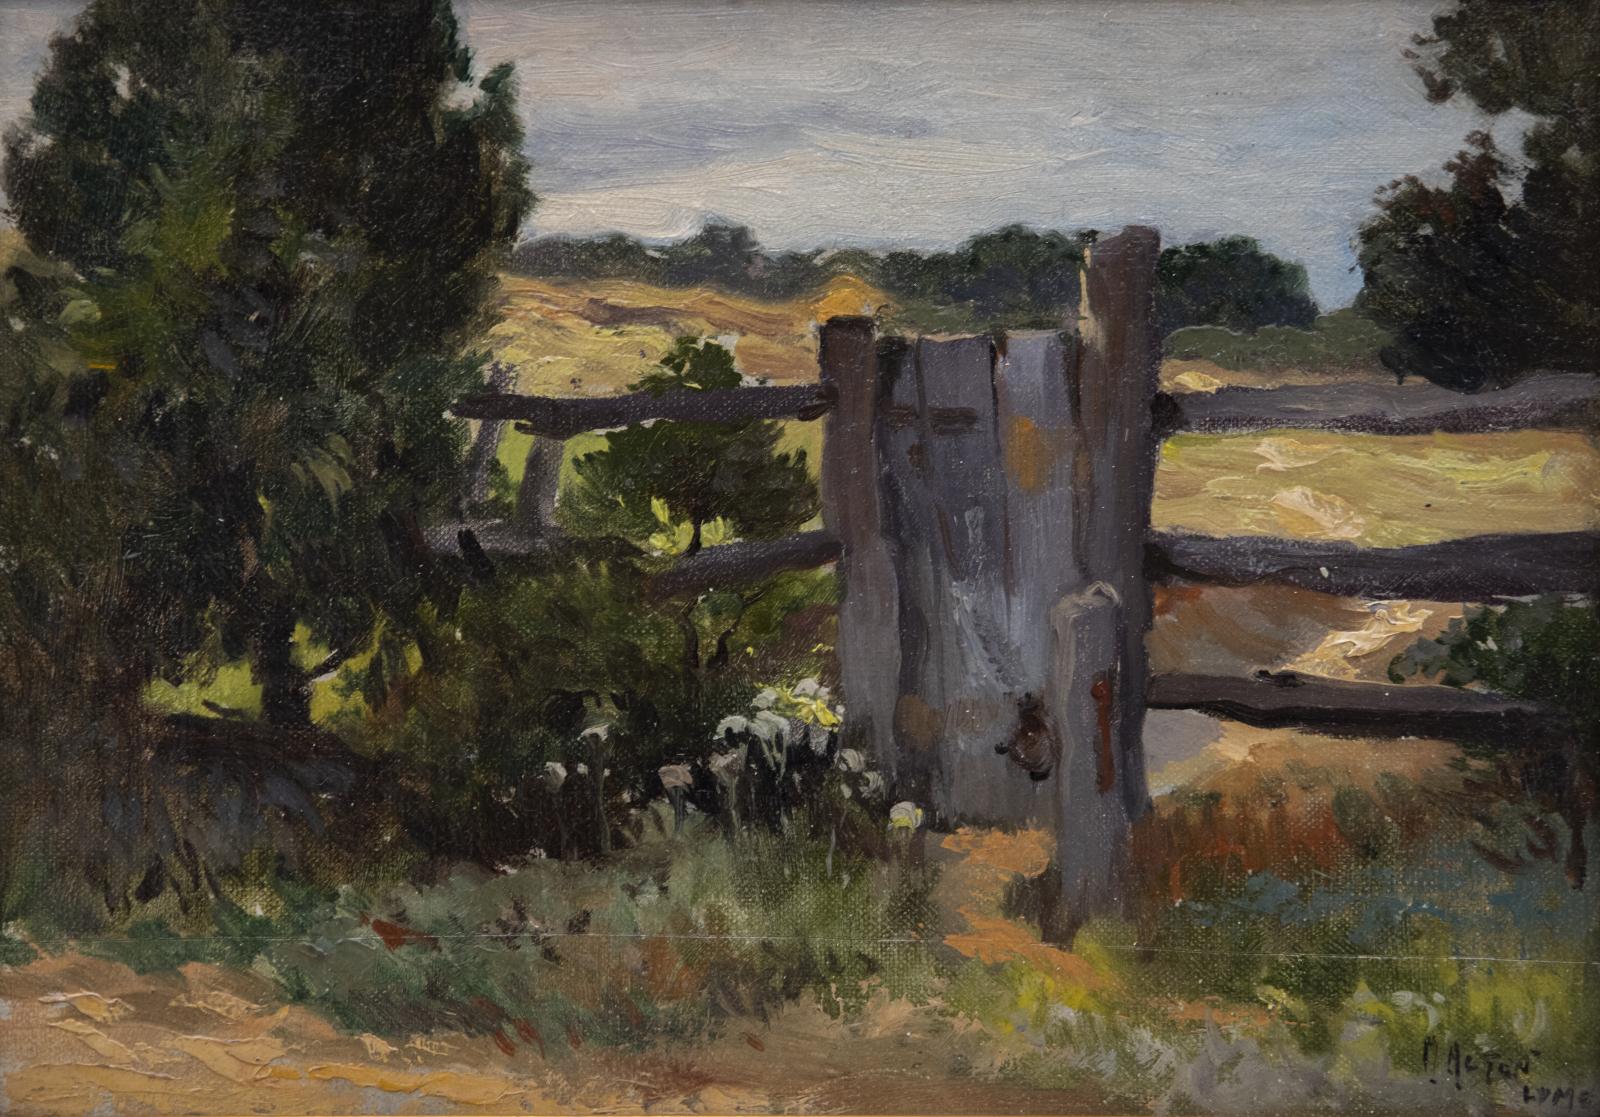 Oil on canvas painting of a wooden split rail fence with gate.